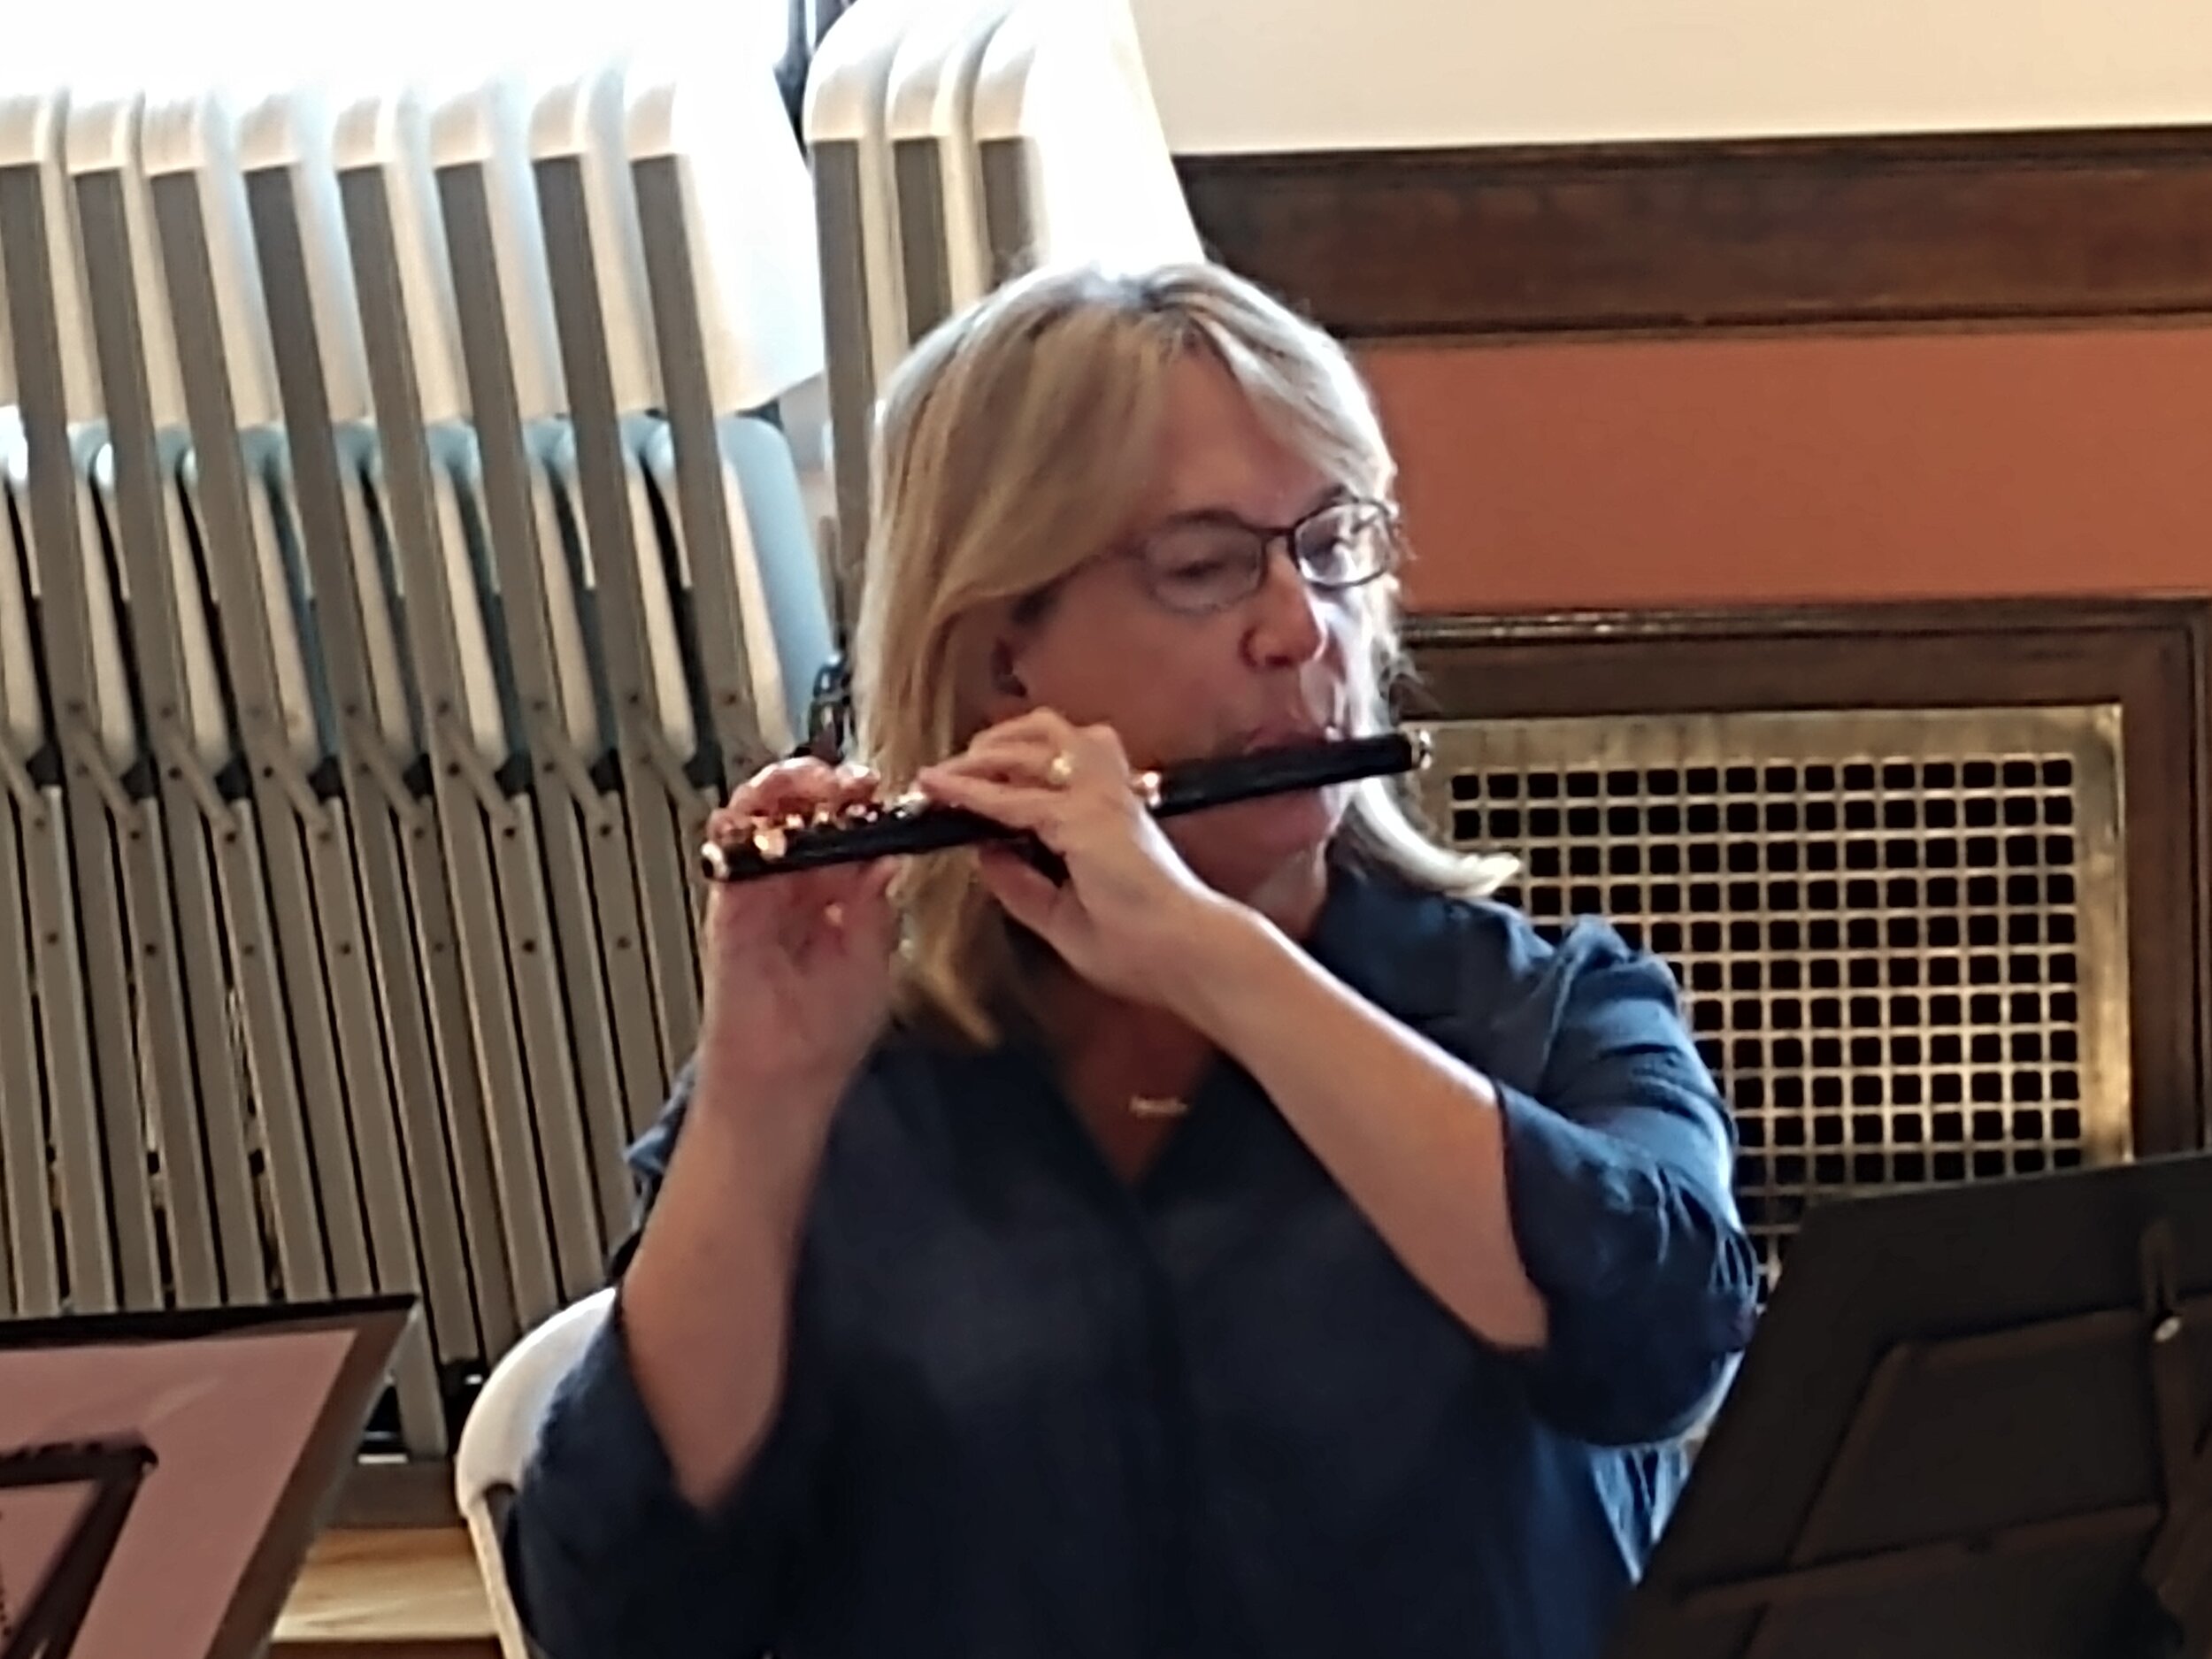 Member playing piccolo